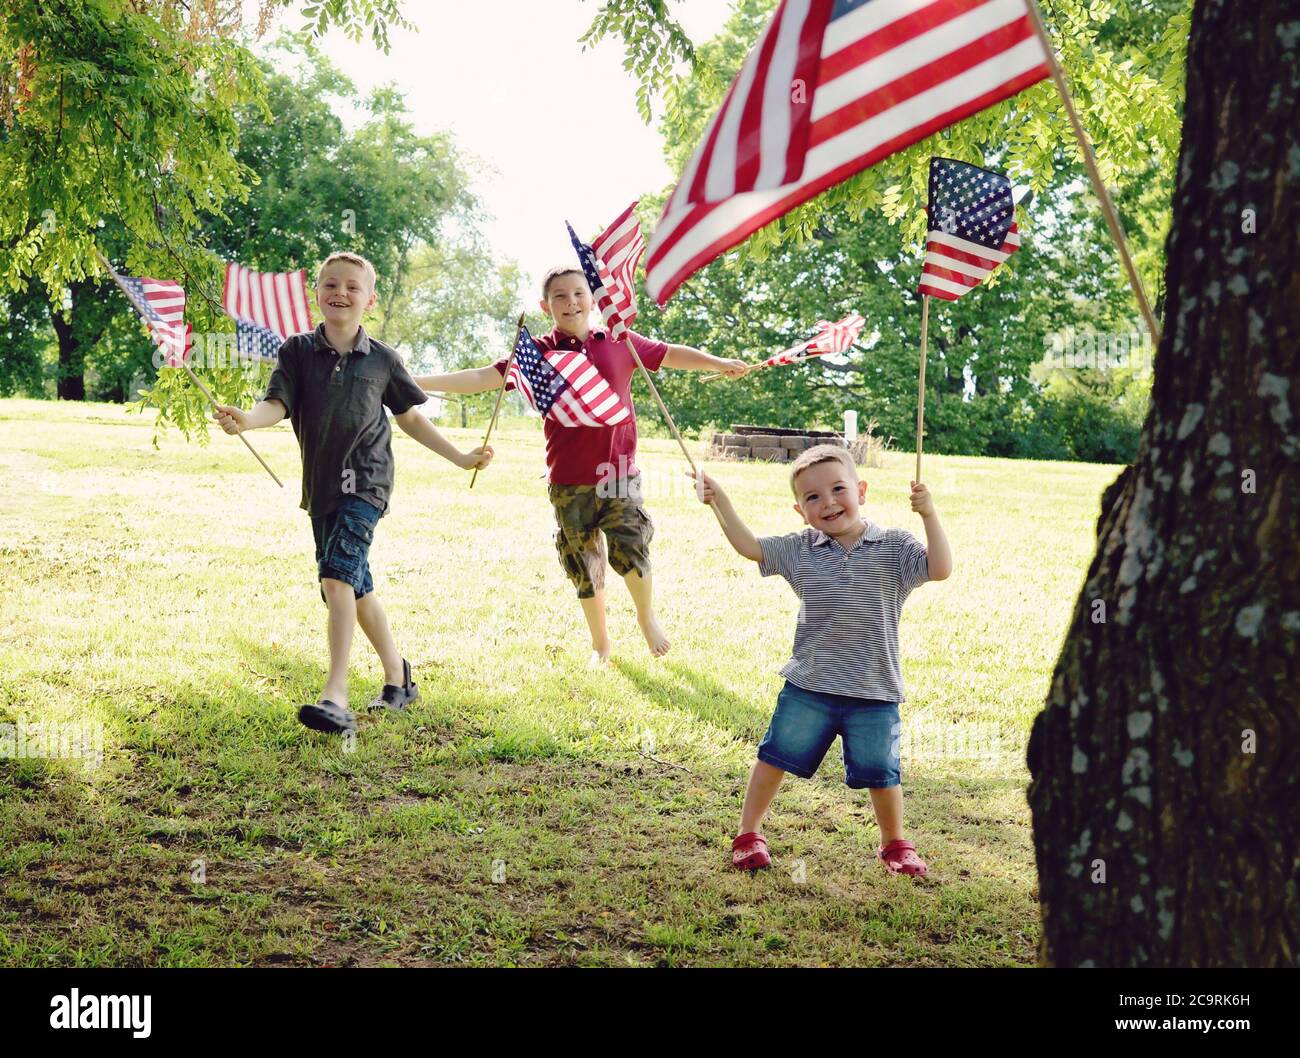 Three boys holding American Flags enthusiastically while waving them Stock Photo